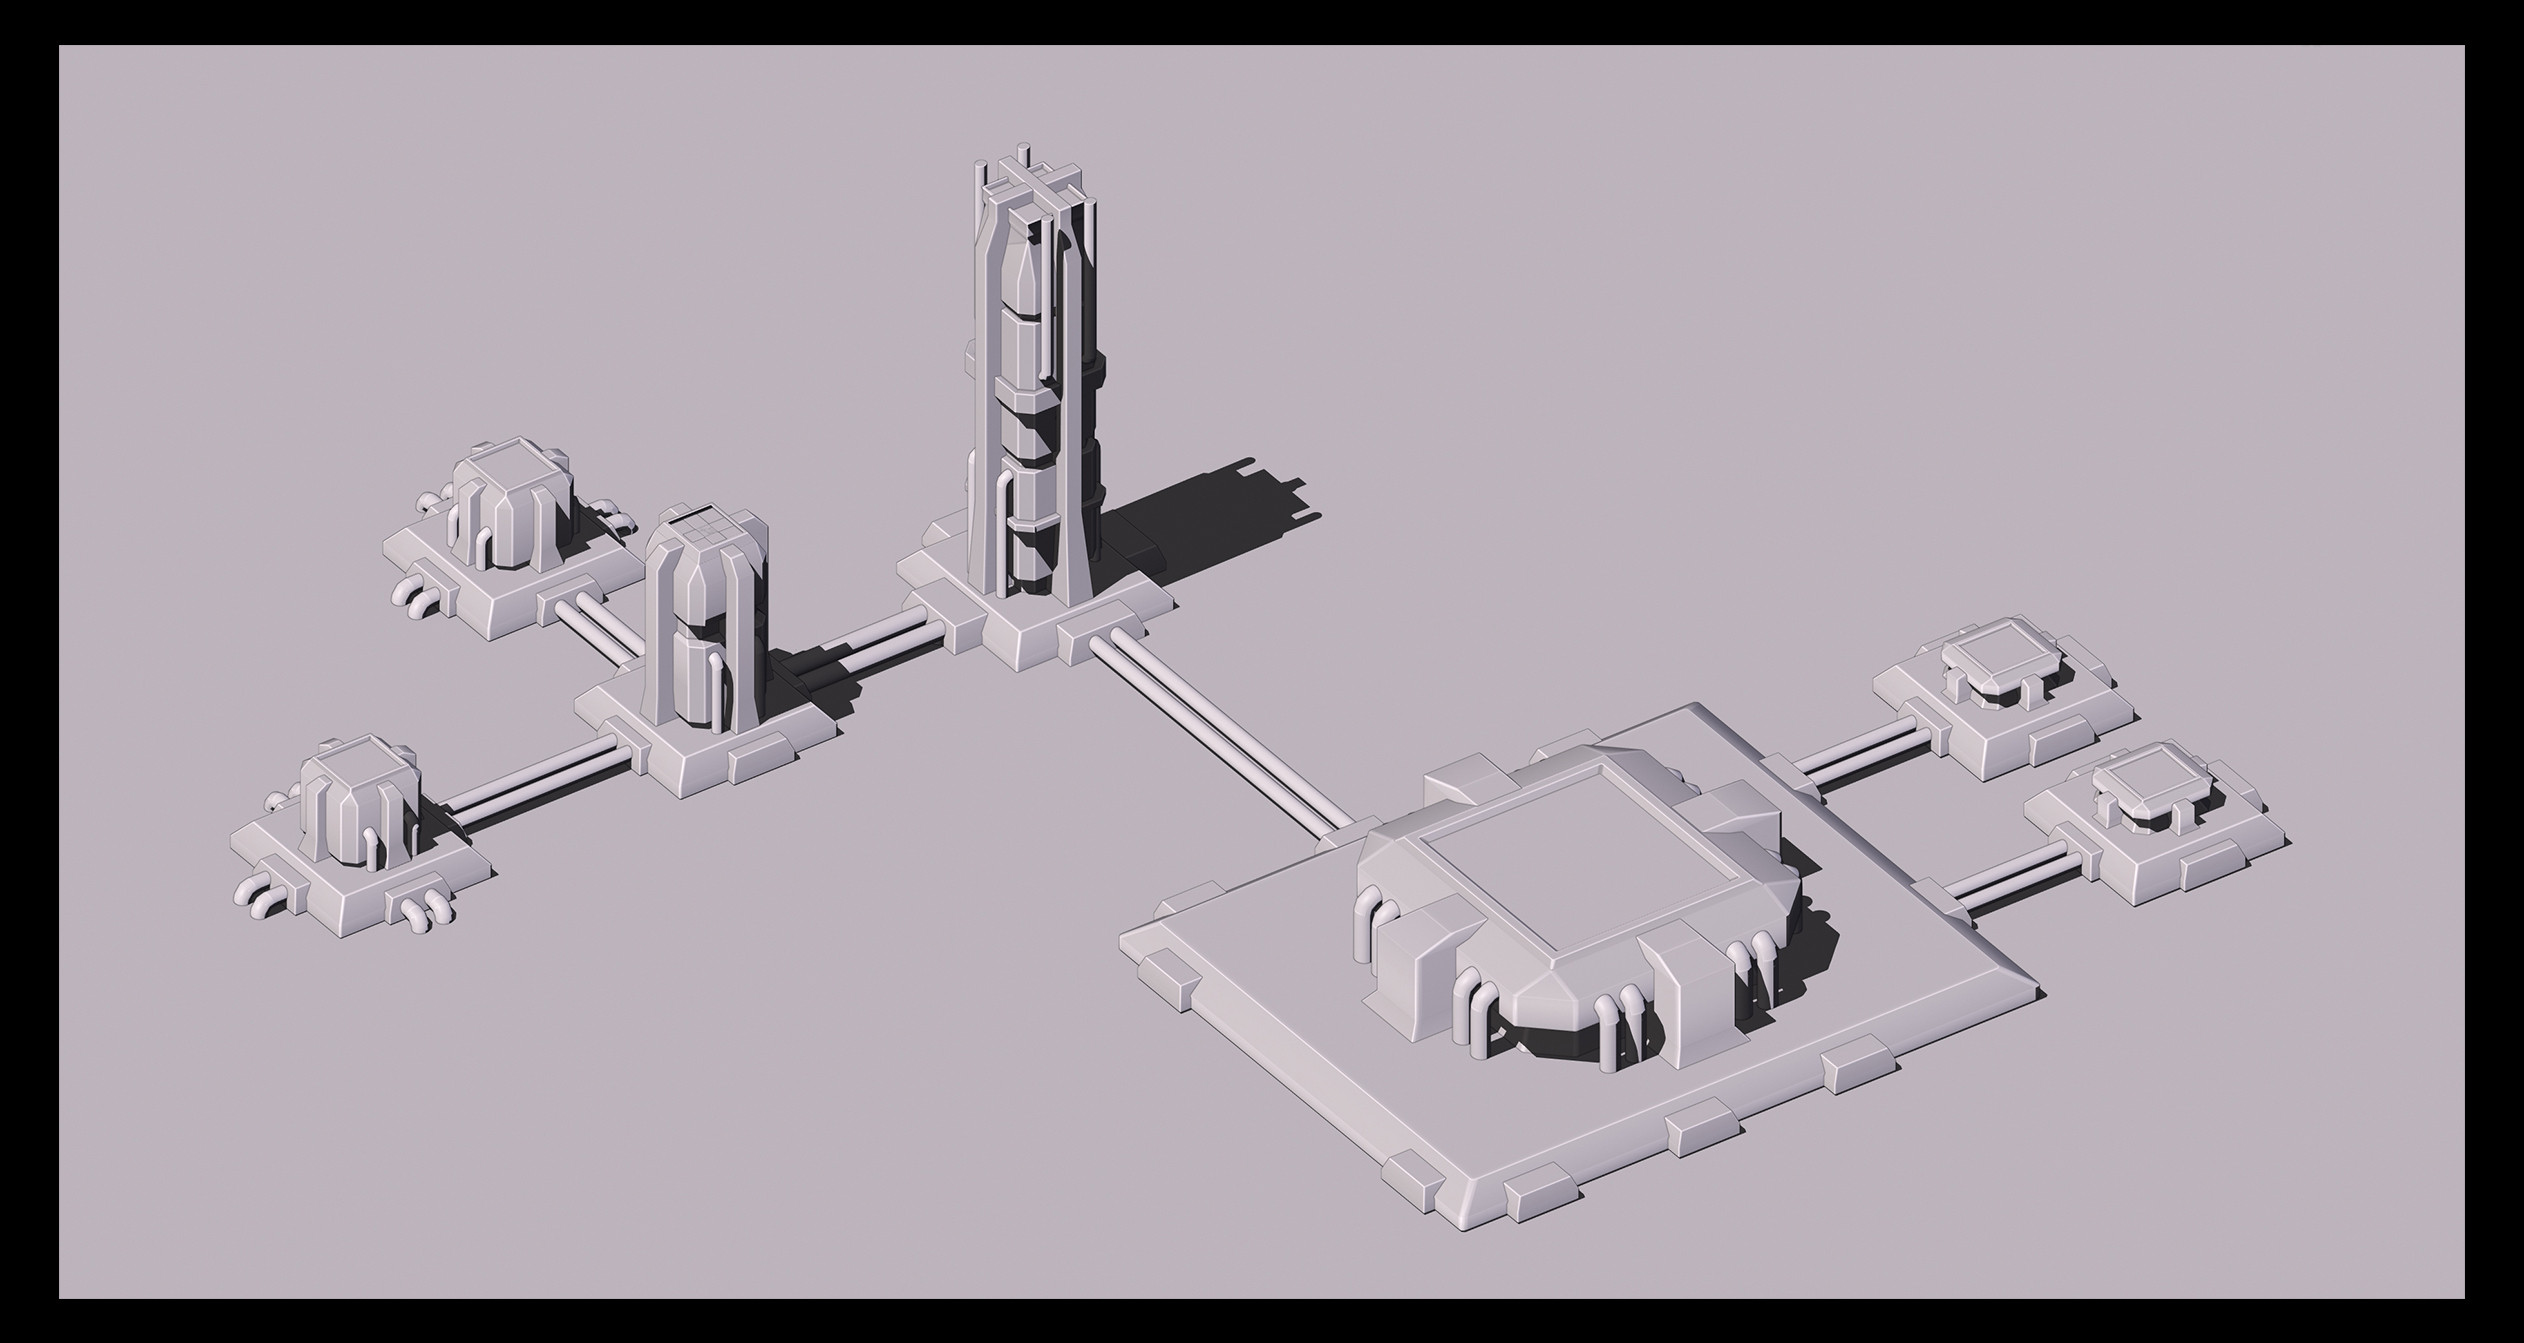 Modeling tiered designs for the industrial towers